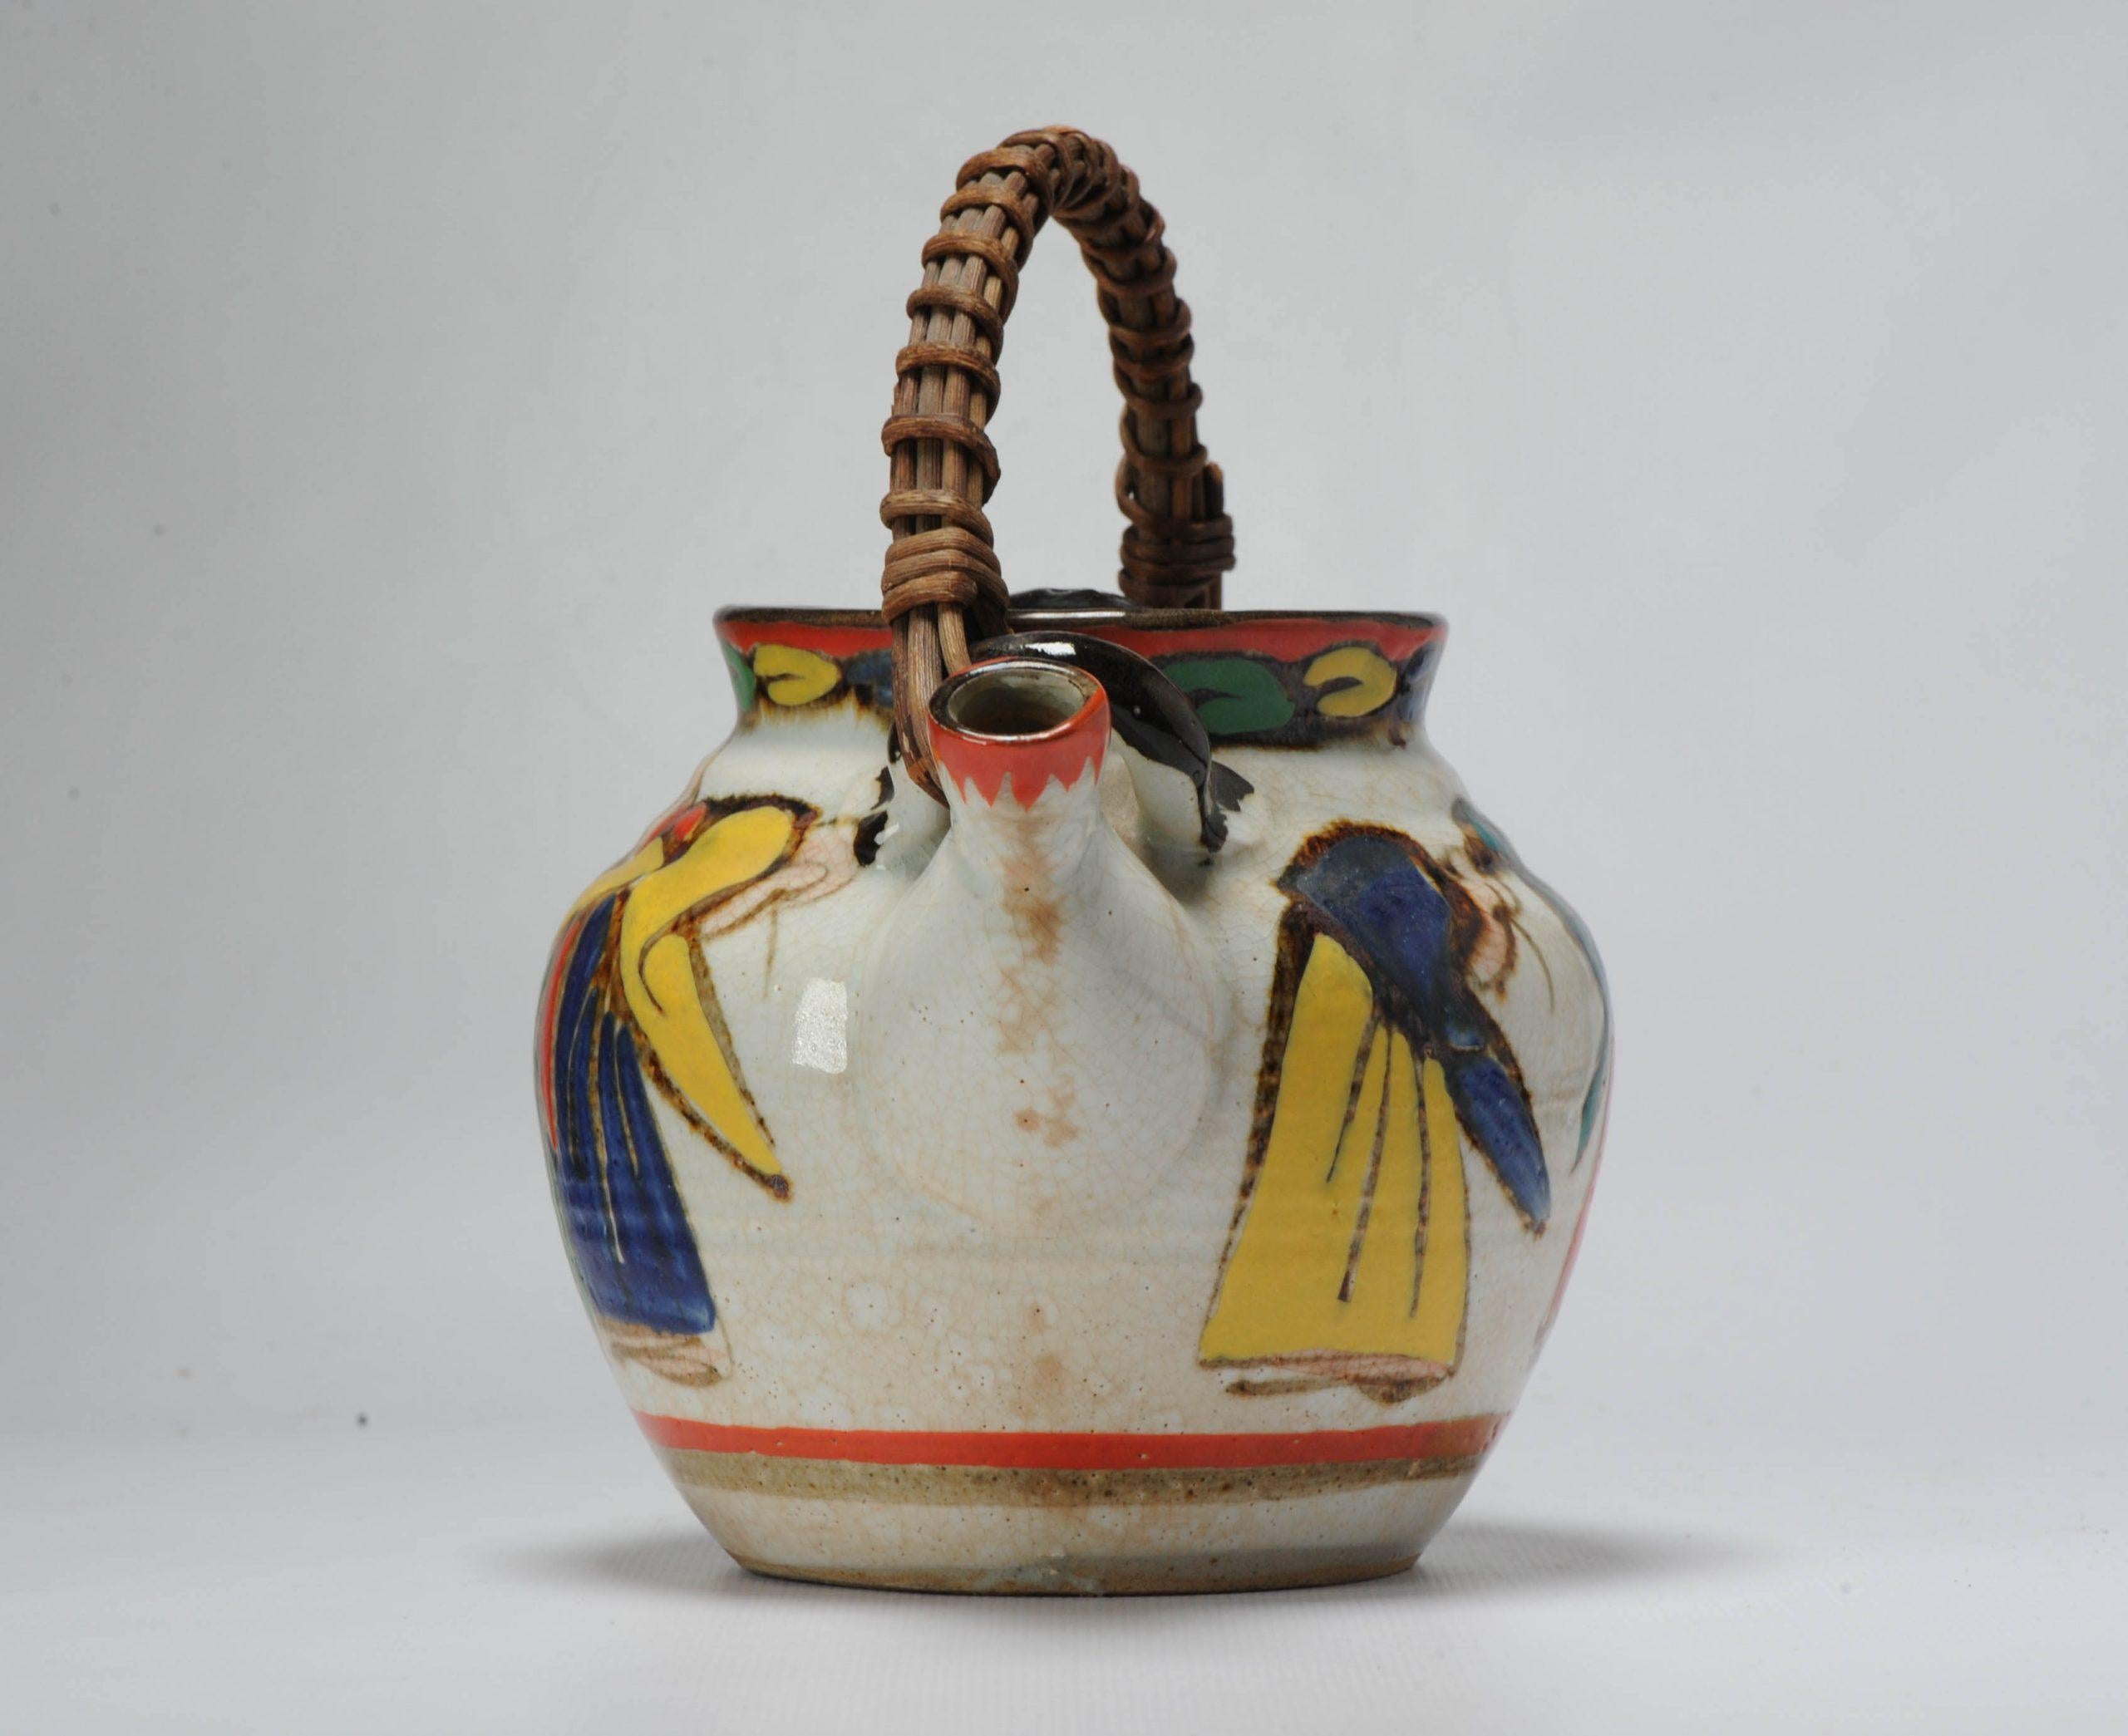 A lovely Japanese teapot Koro with figures in enamel and nice handle.

Additional information:
Material: Porcelain & Pottery
Type: Tea/Coffee Drinking: Bowls, Cups & Teapots
Japanese Style: Satsuma
Region of Origin: Japan
Period: 20th century Showa